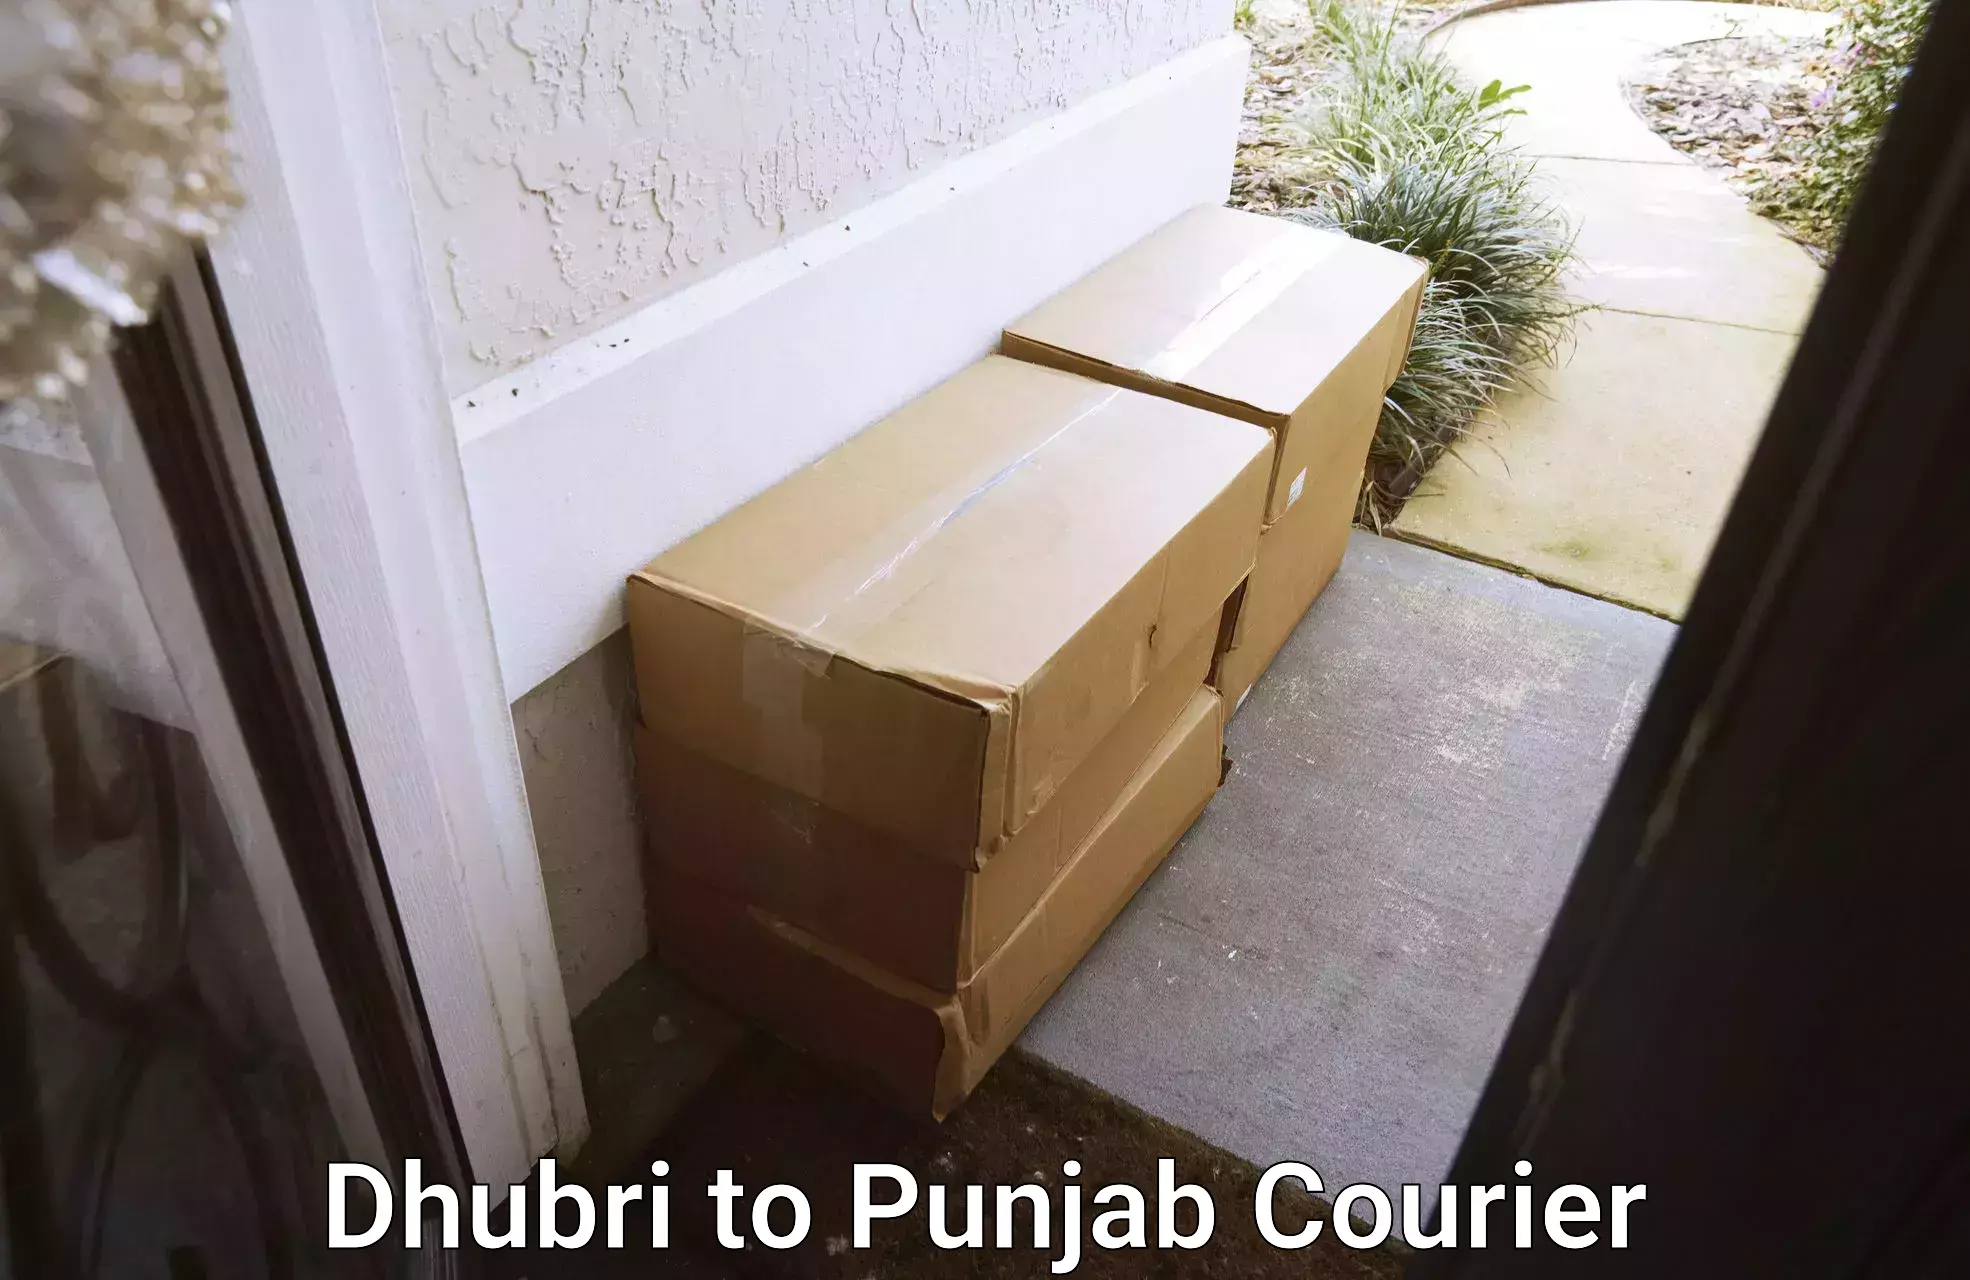 Courier service partnerships Dhubri to Punjab Agricultural University Ludhiana